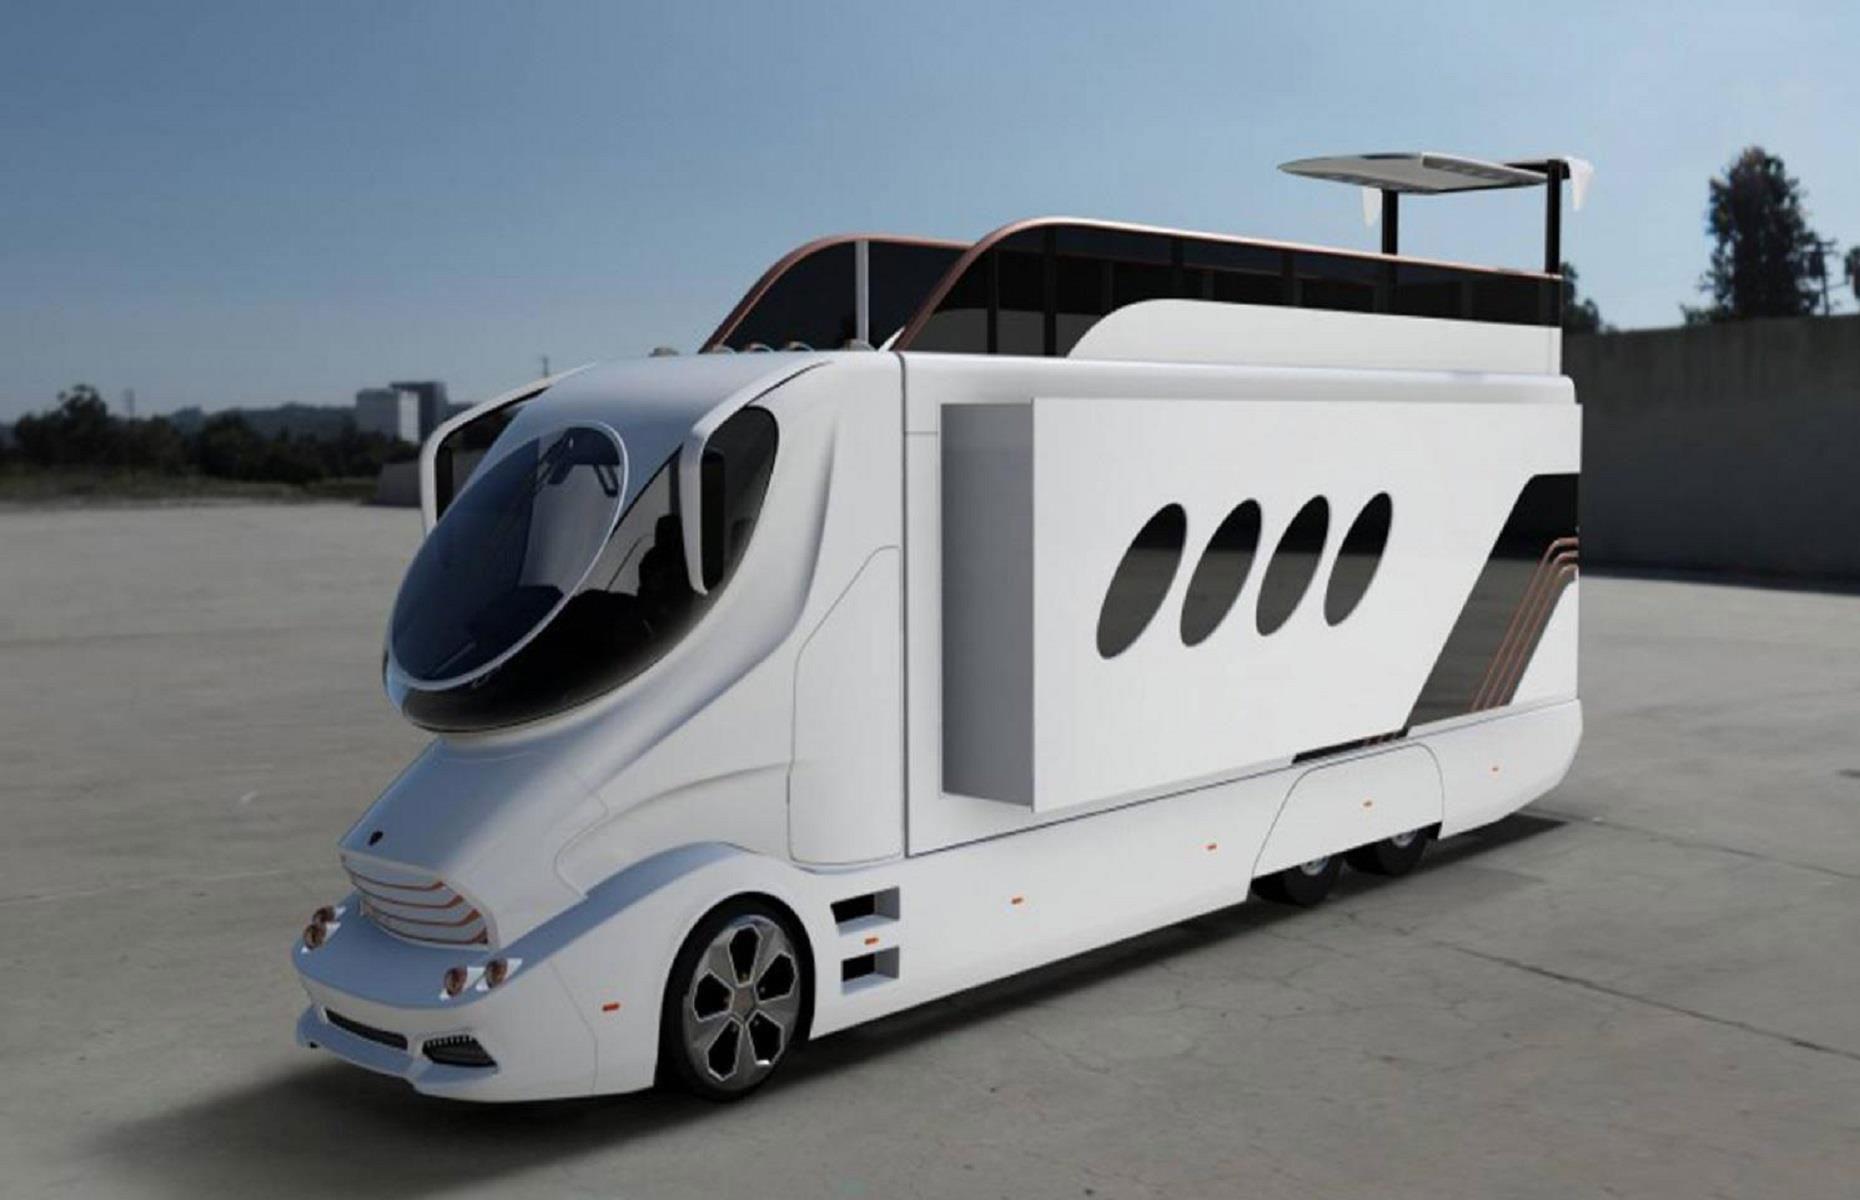 <p>Marchi Mobile got very creative with the exterior and drew on racing car, yacht and aviation designs to create the unique RV, which wows with a fishbowl-style cockpit.</p>  <p>Intended to showcase the views, the design features an ingenious adjustable sun protection system to block out unwanted rays.</p>  <p>Yacht-inspired porthole windows dot the sides of the futuristic-looking motorhome, which has thick carbon-fiber walls for optimum insulation without adding much weight.</p>